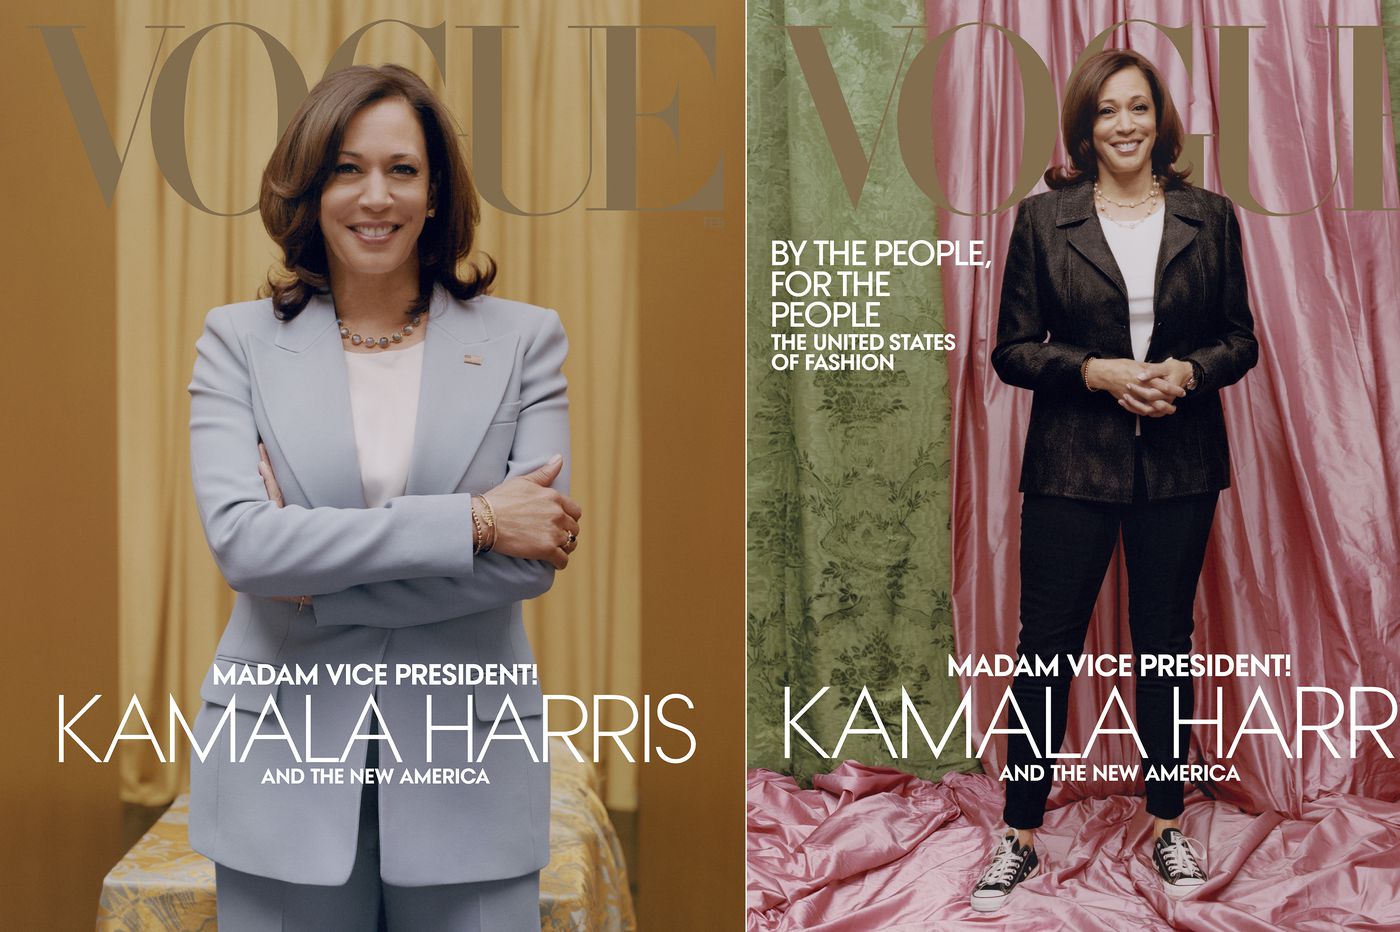 Two Public Relations Specialists’ Views on Kamala Harris Vogue Cover Uproar